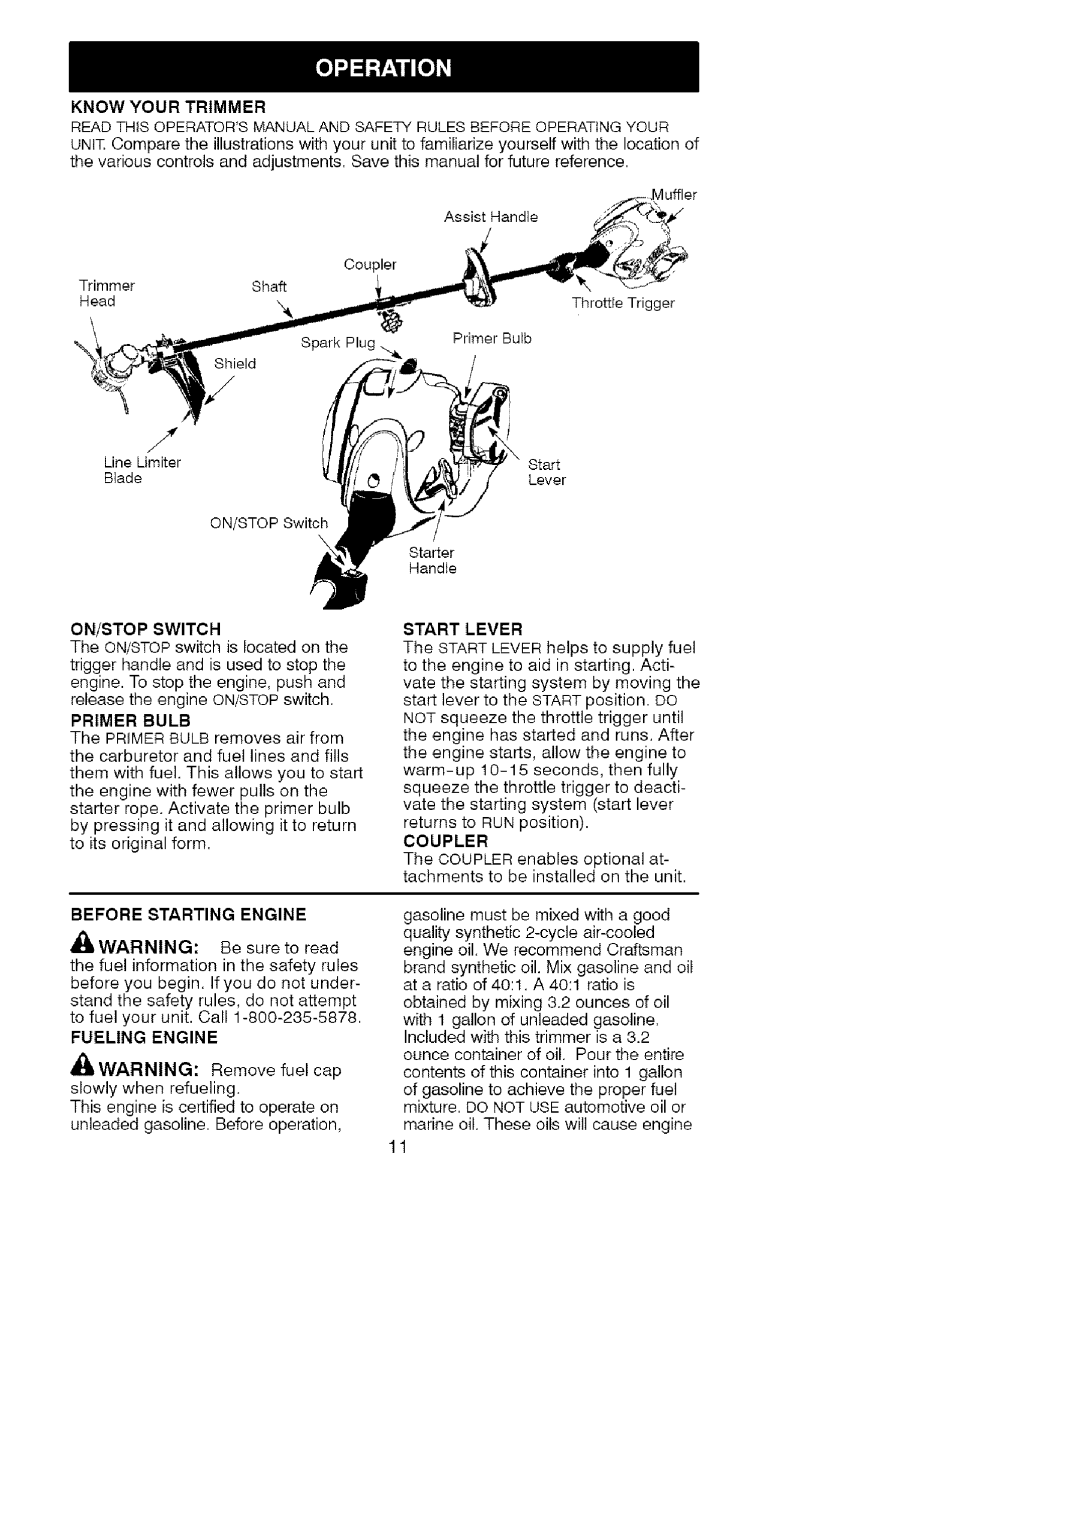 Craftsman 358.791051 manual Know Your Trimmer, Before Starting Engine, Start Lever, Coupler 